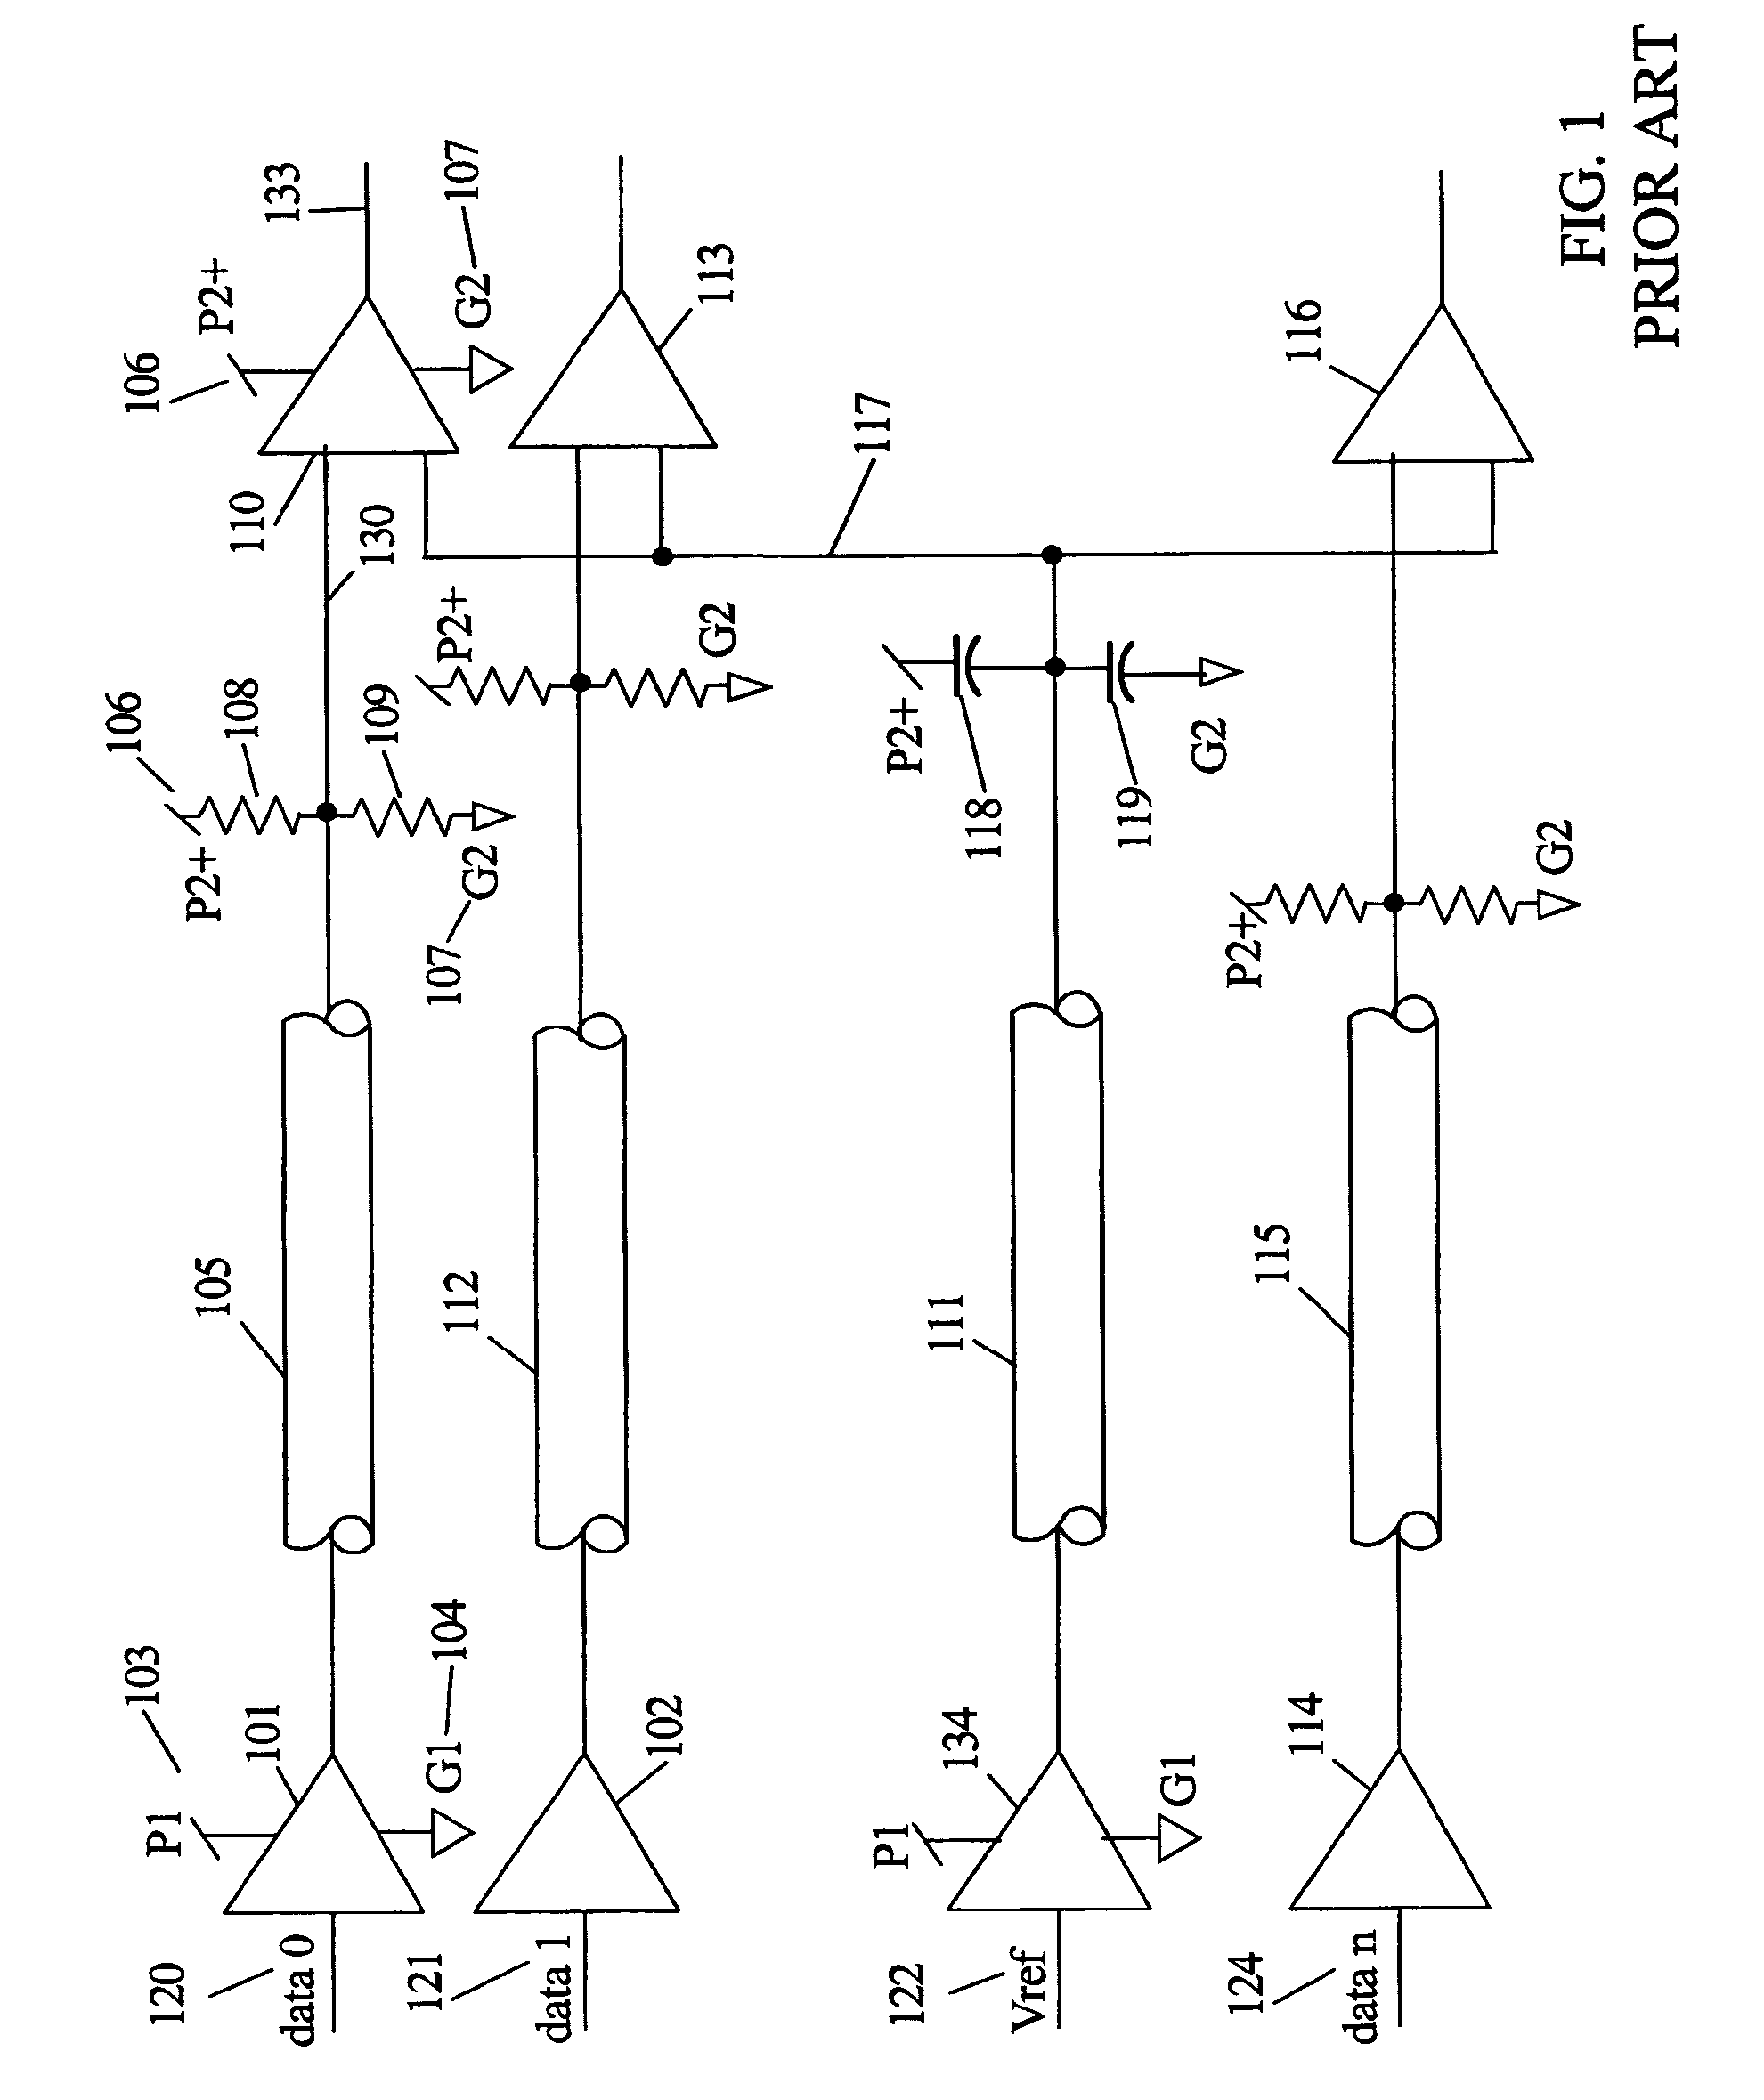 Circuit for generating a tracking reference voltage